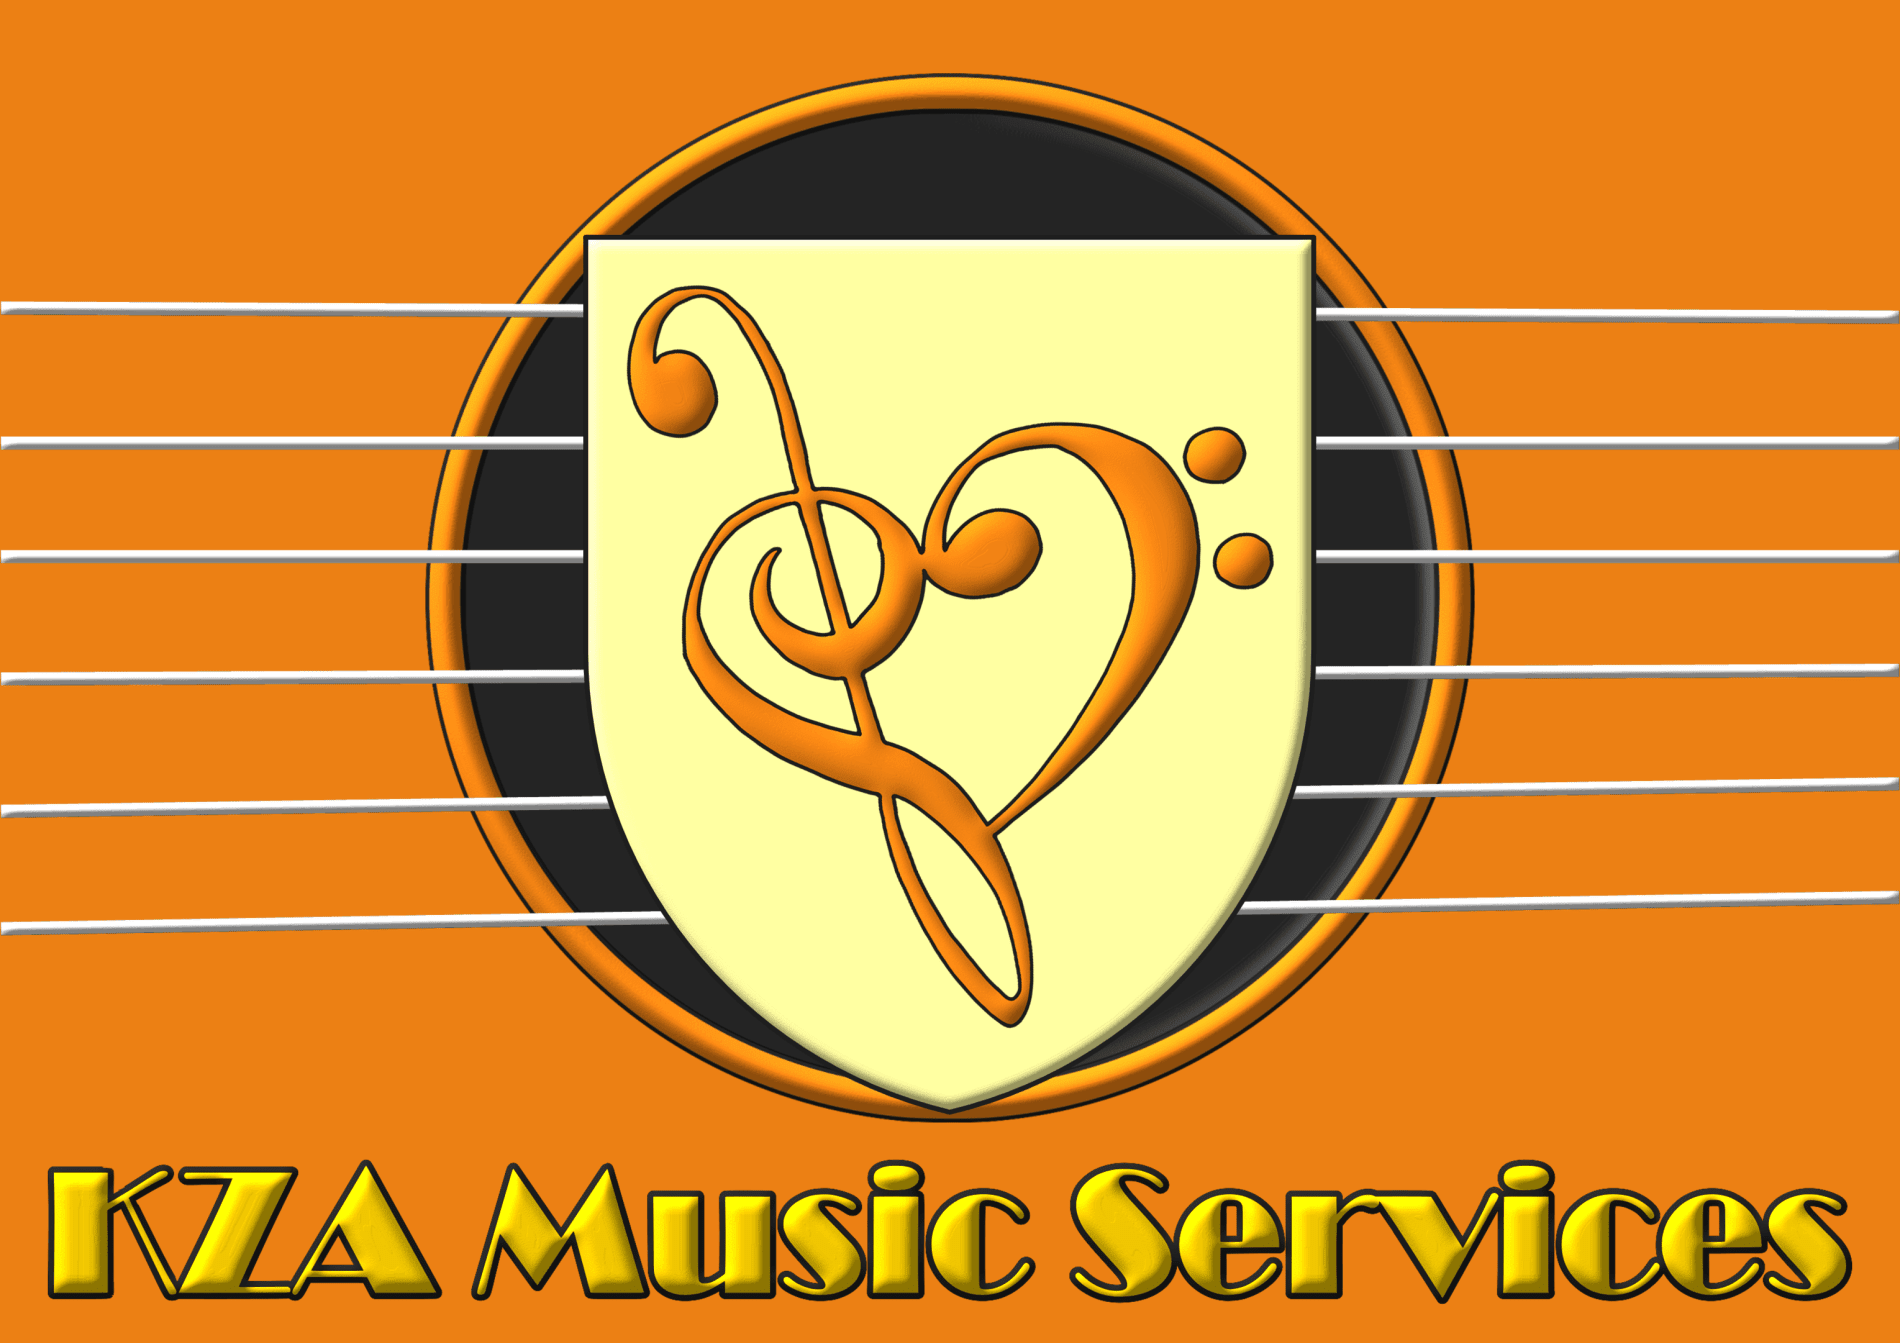 KZA Music Services